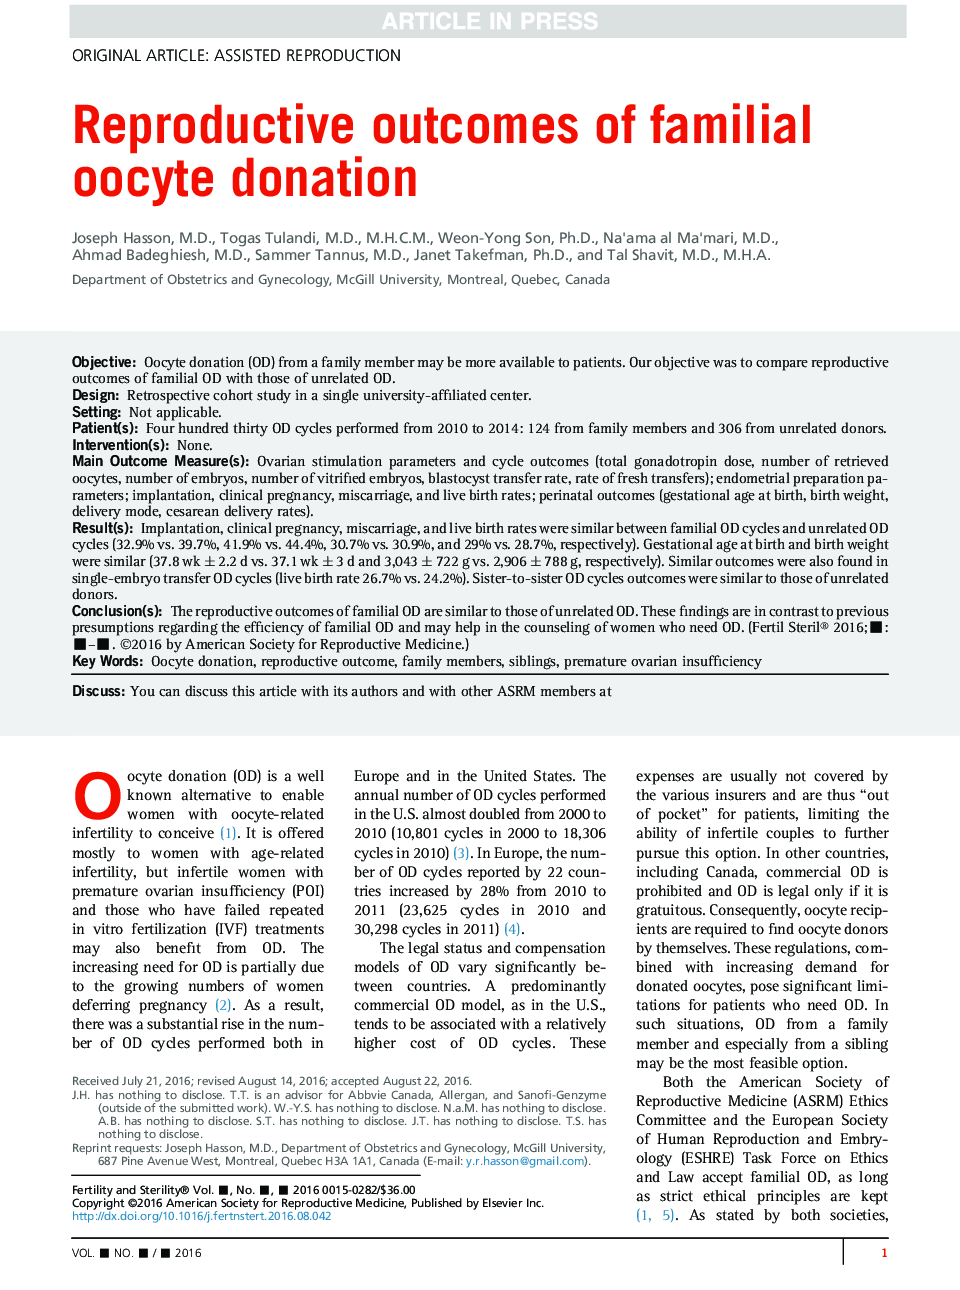 Reproductive outcomes of familial oocyte donation